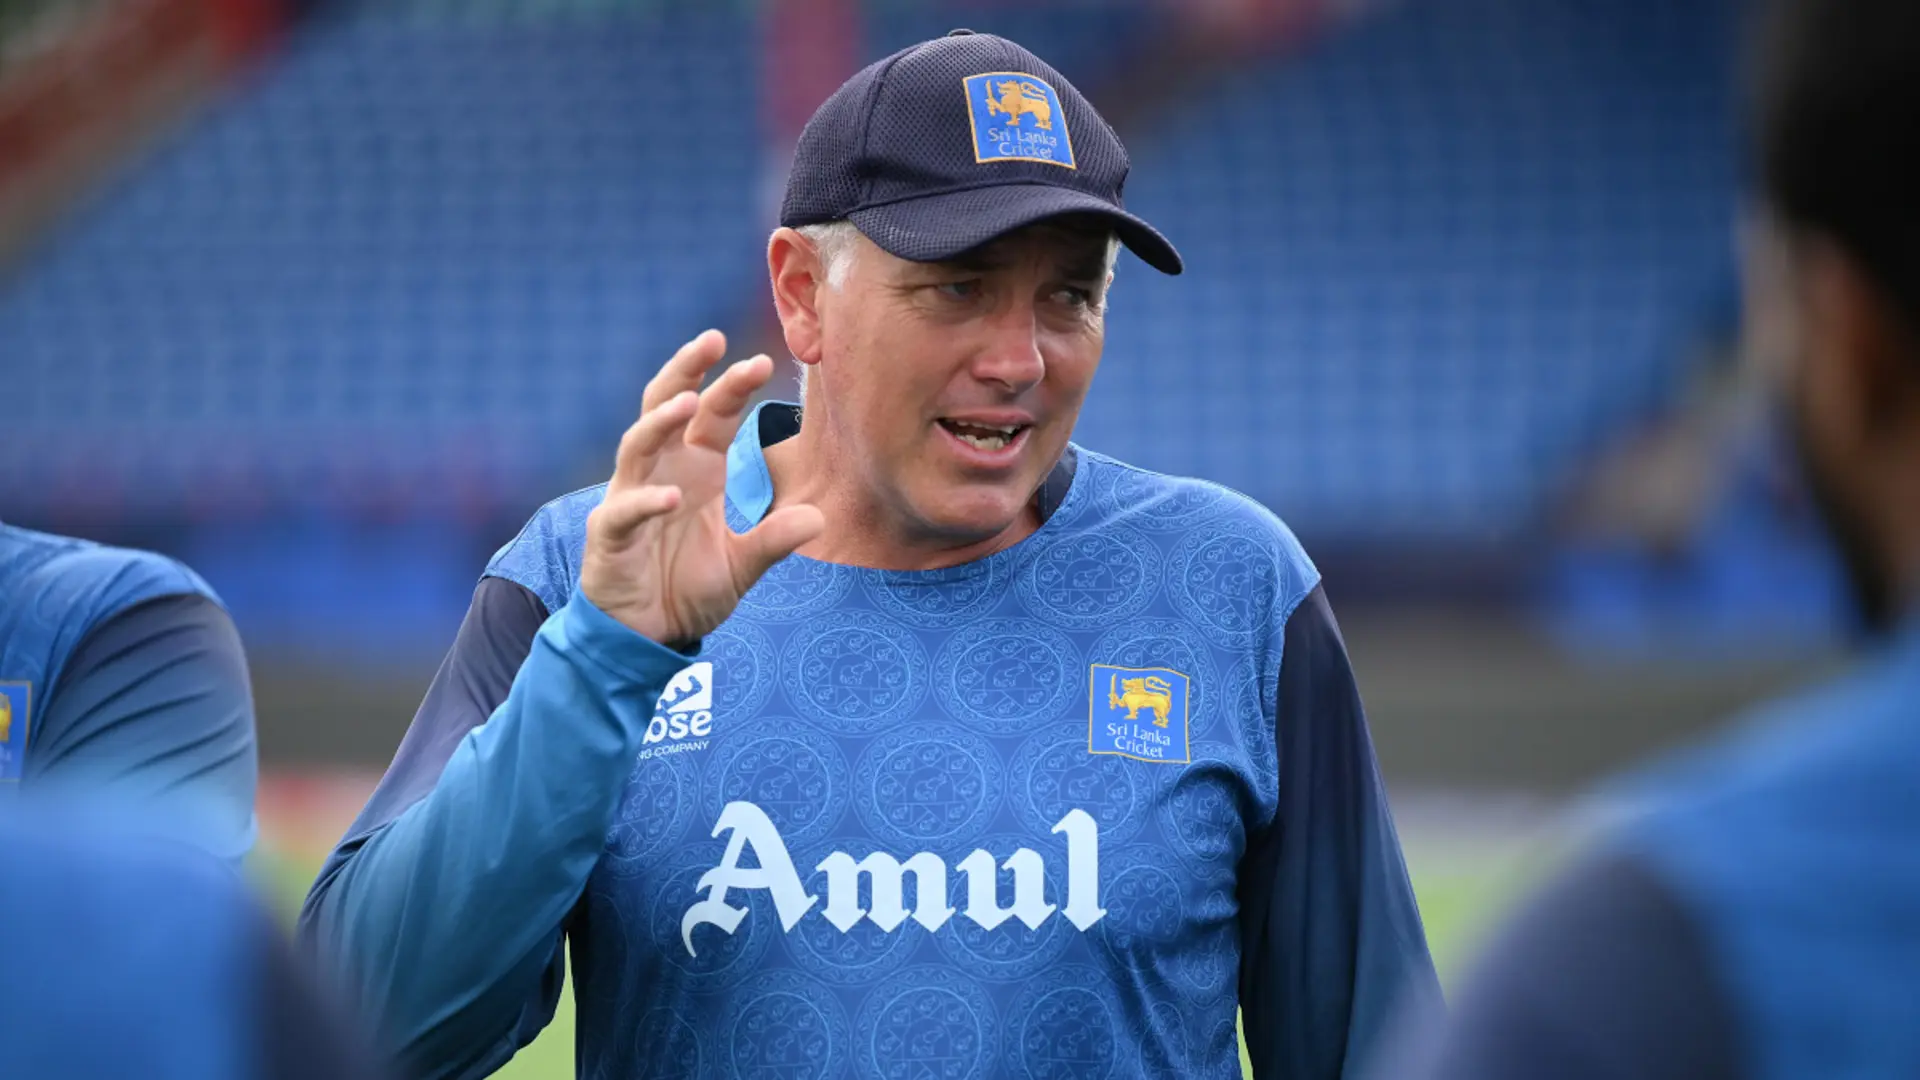 Silverwood resigns as SL head coach after World Cup debacle